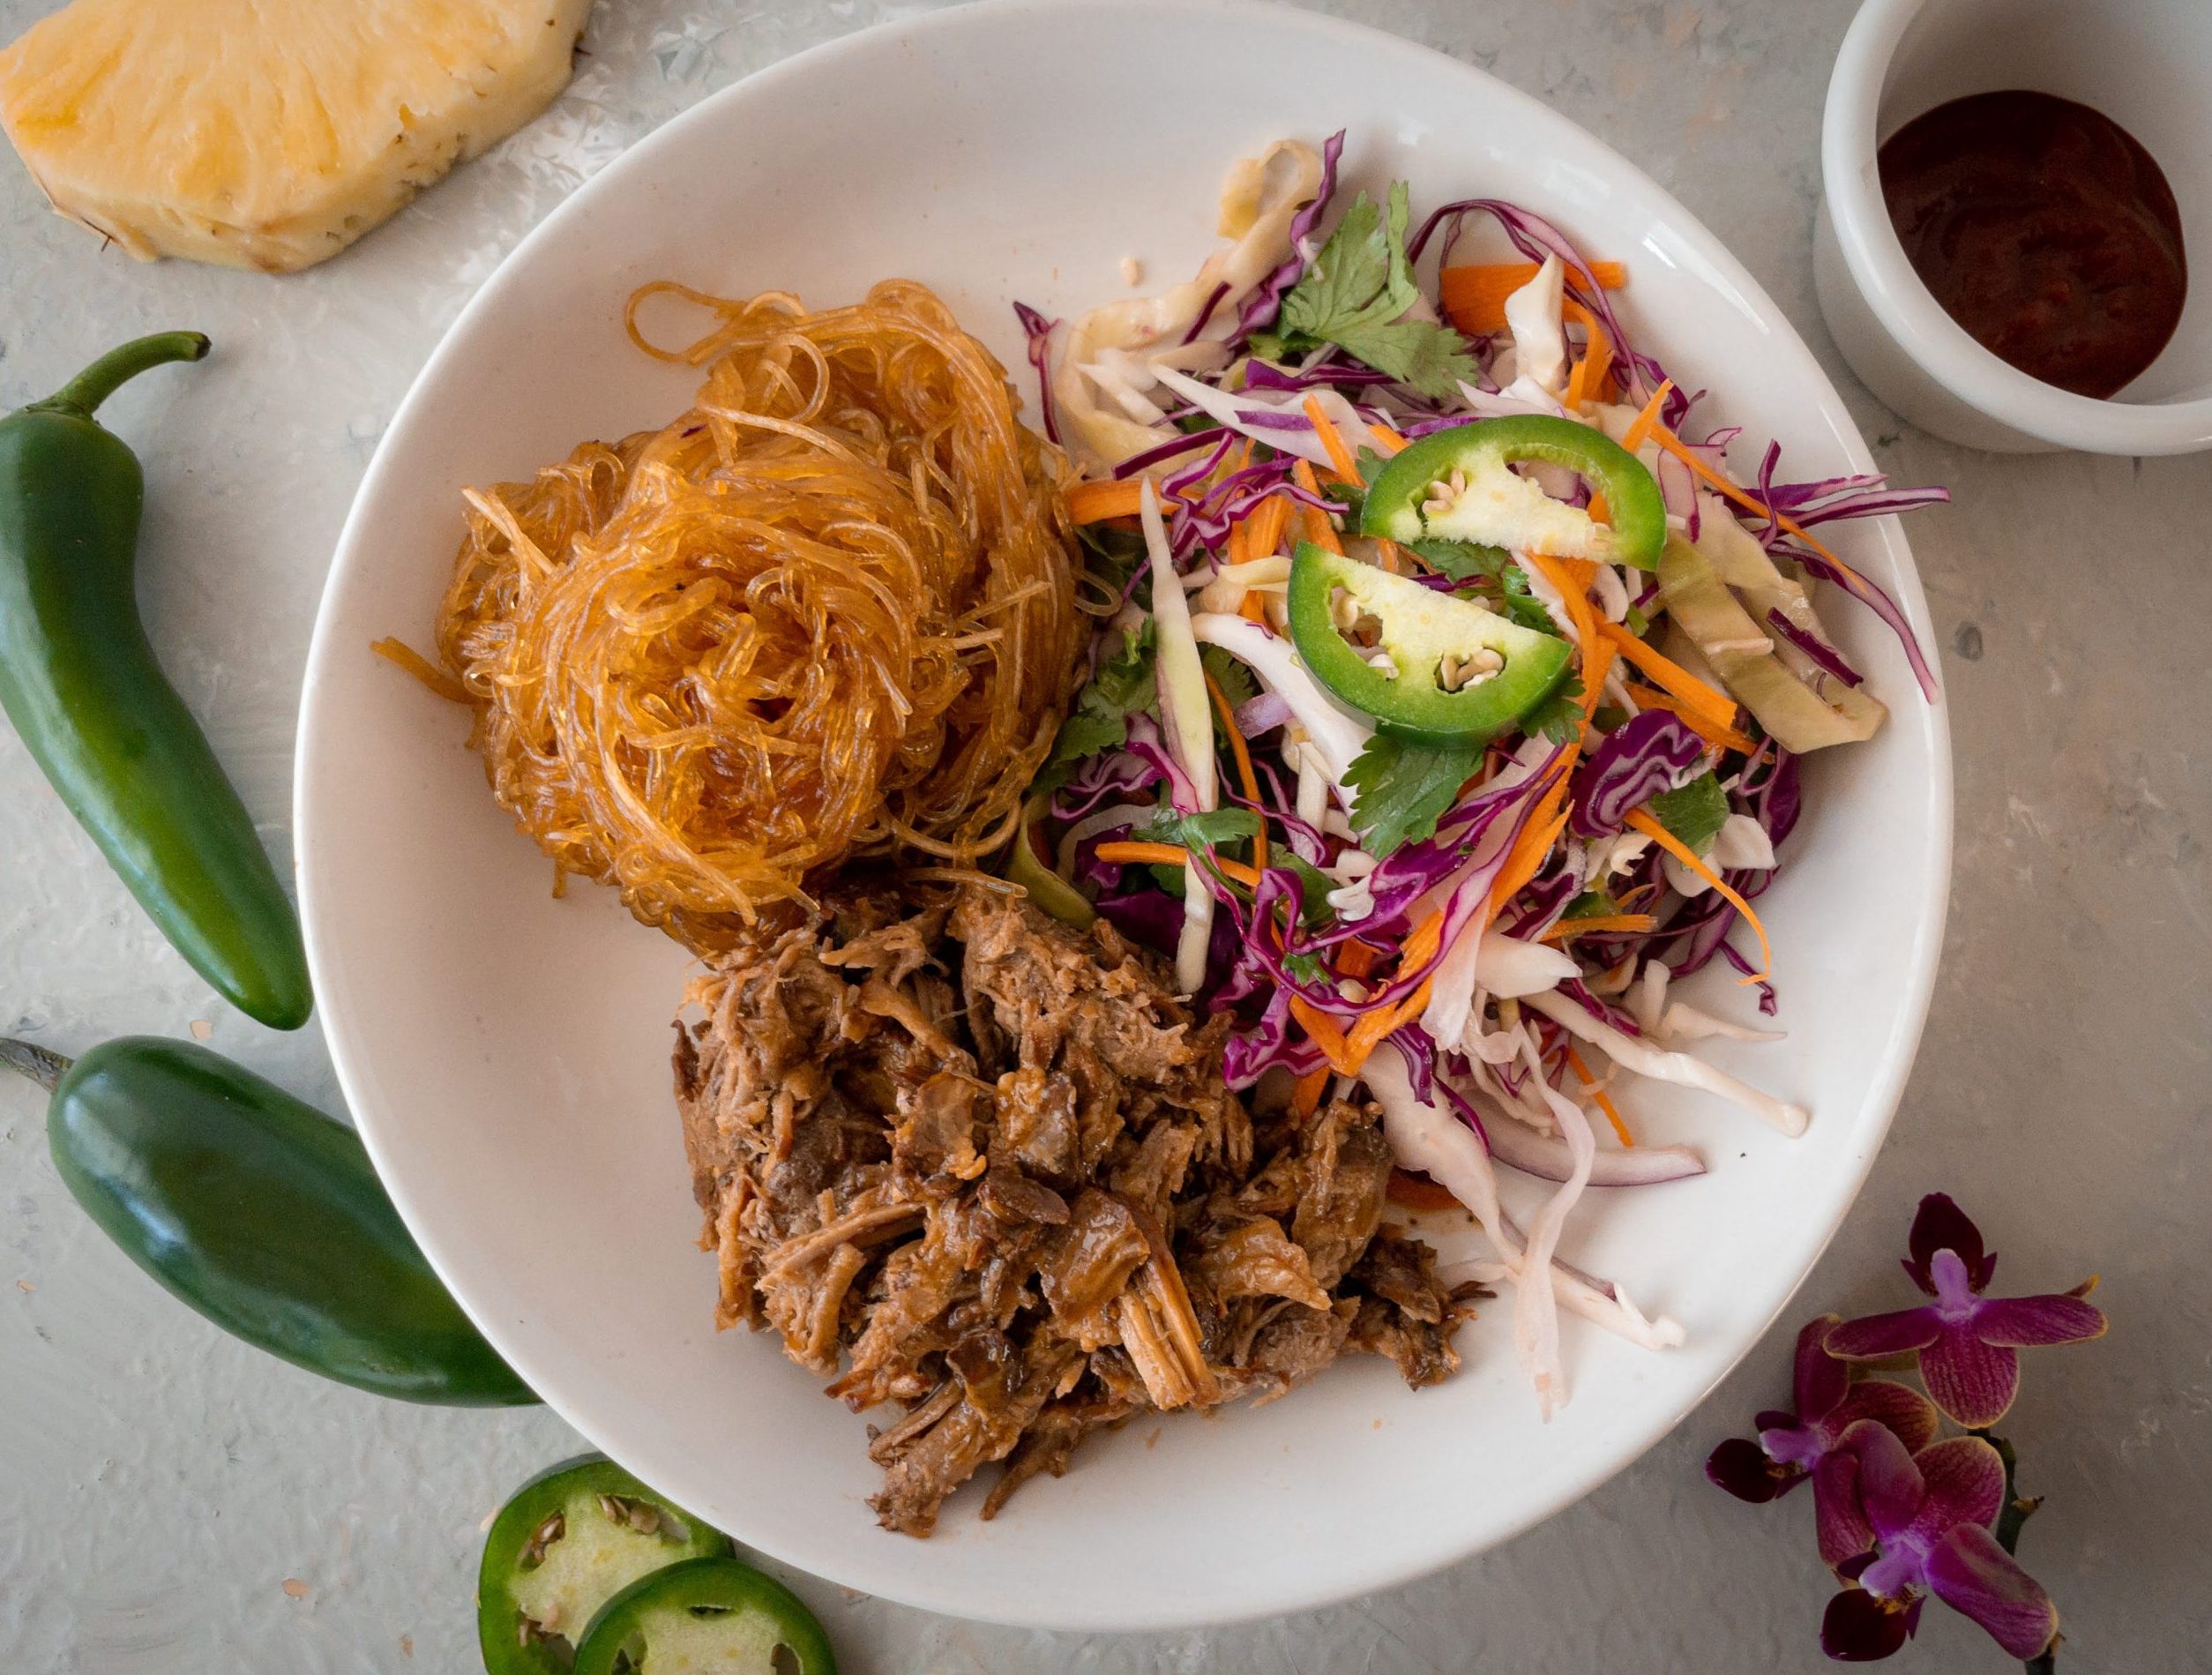 Hawaiin inspired mix plate with pulled pork.